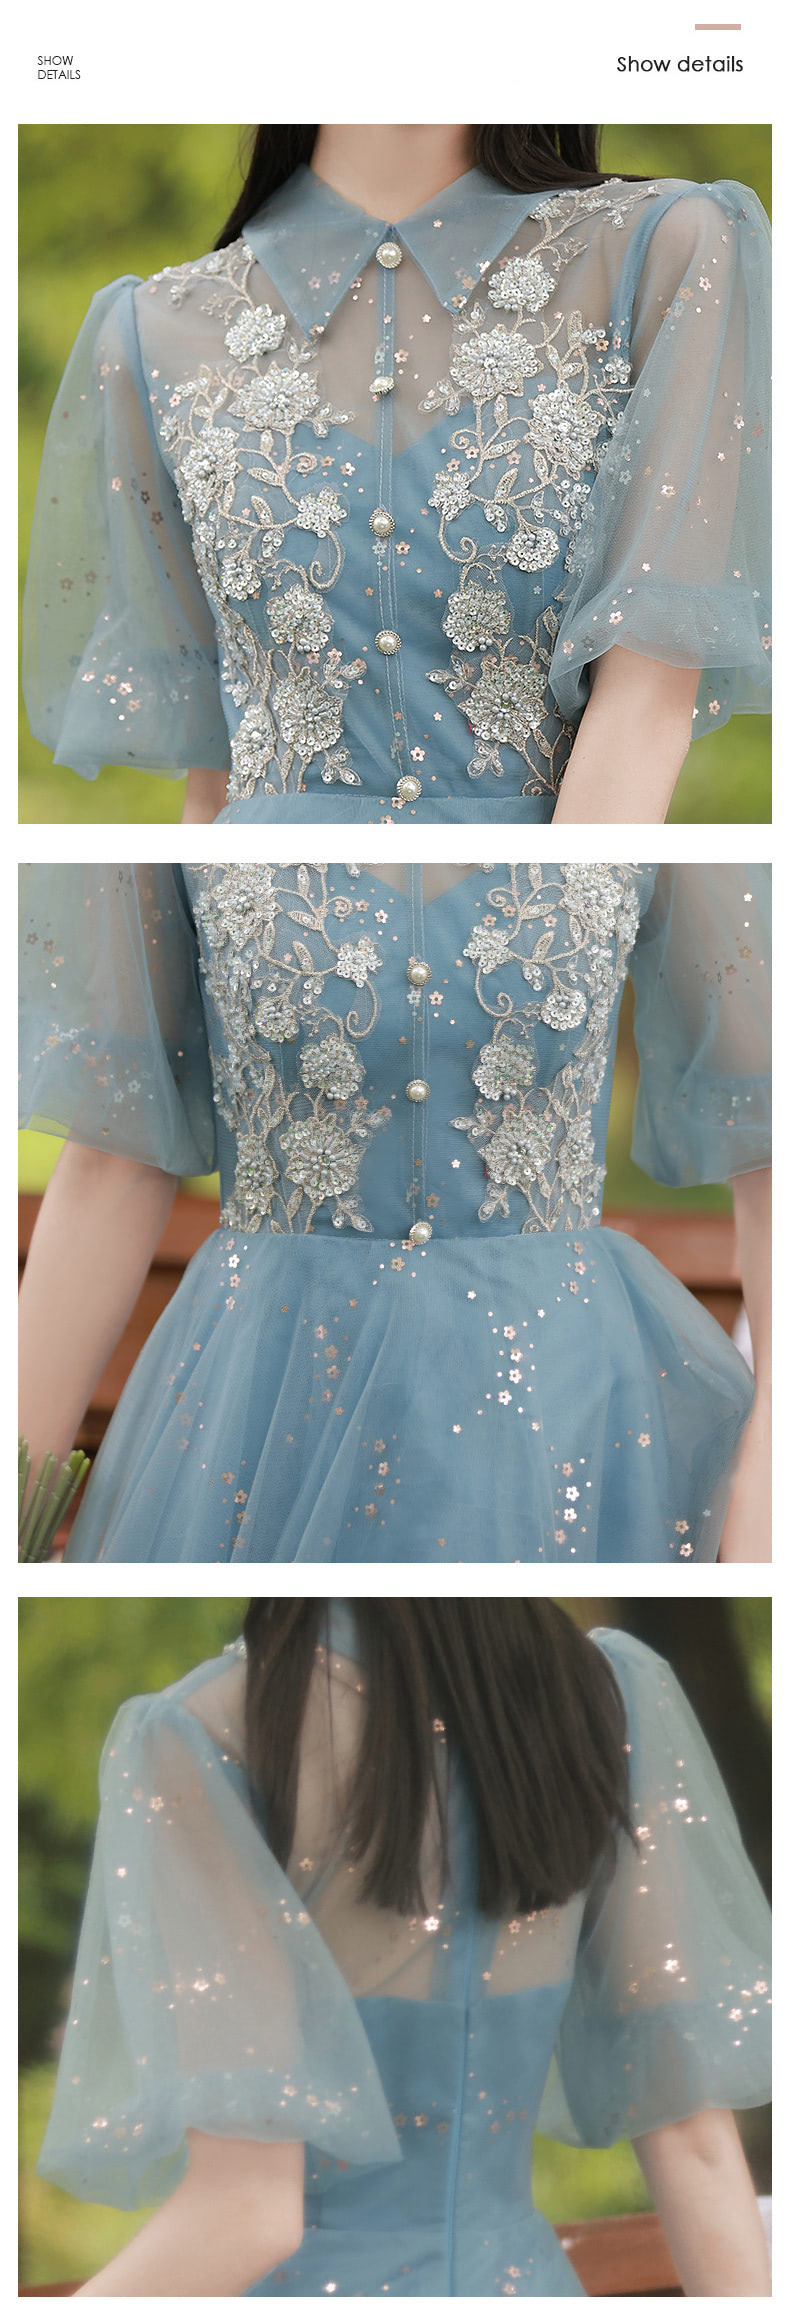 Charming Sweet Square Collar Blue Floral Embroidered Evening Party Dress12